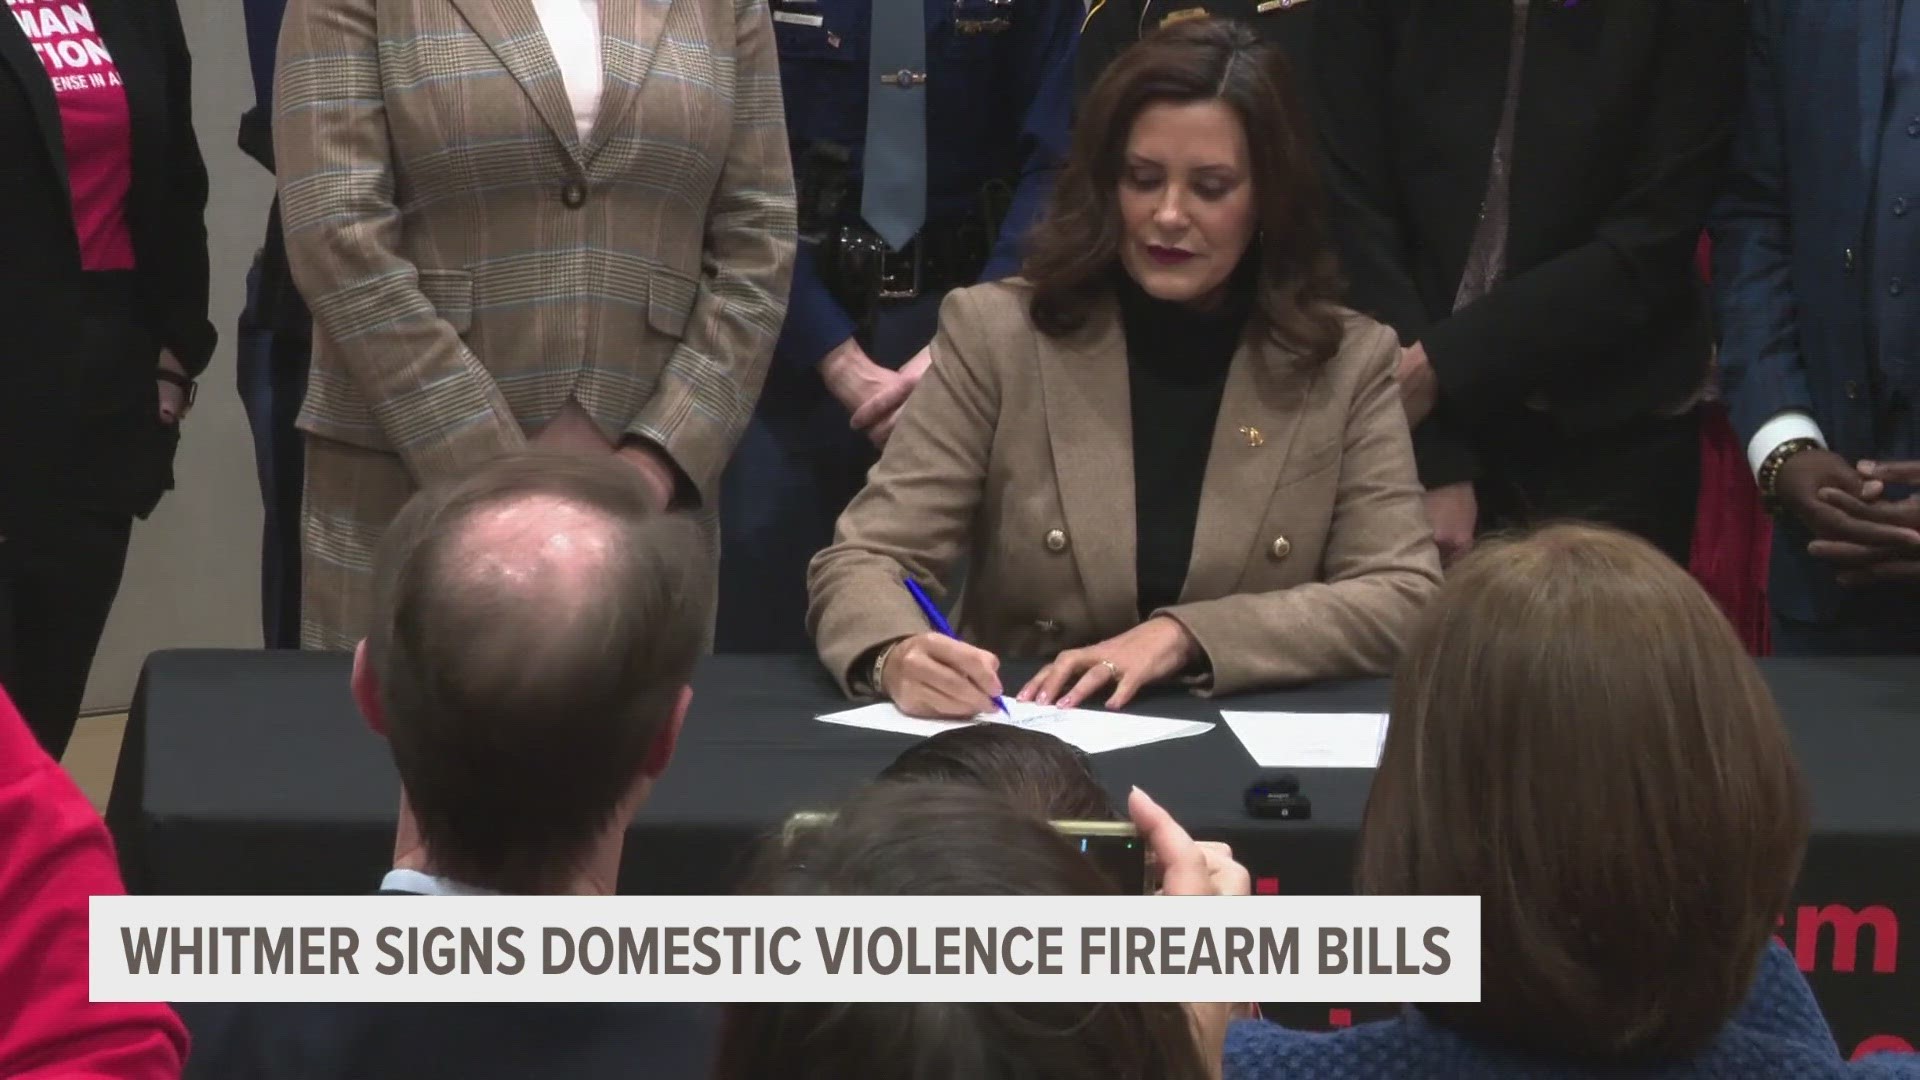 Whitmer said at Monday's signing that prohibiting gun possession for people involved in domestic violence it's "just common sense.”